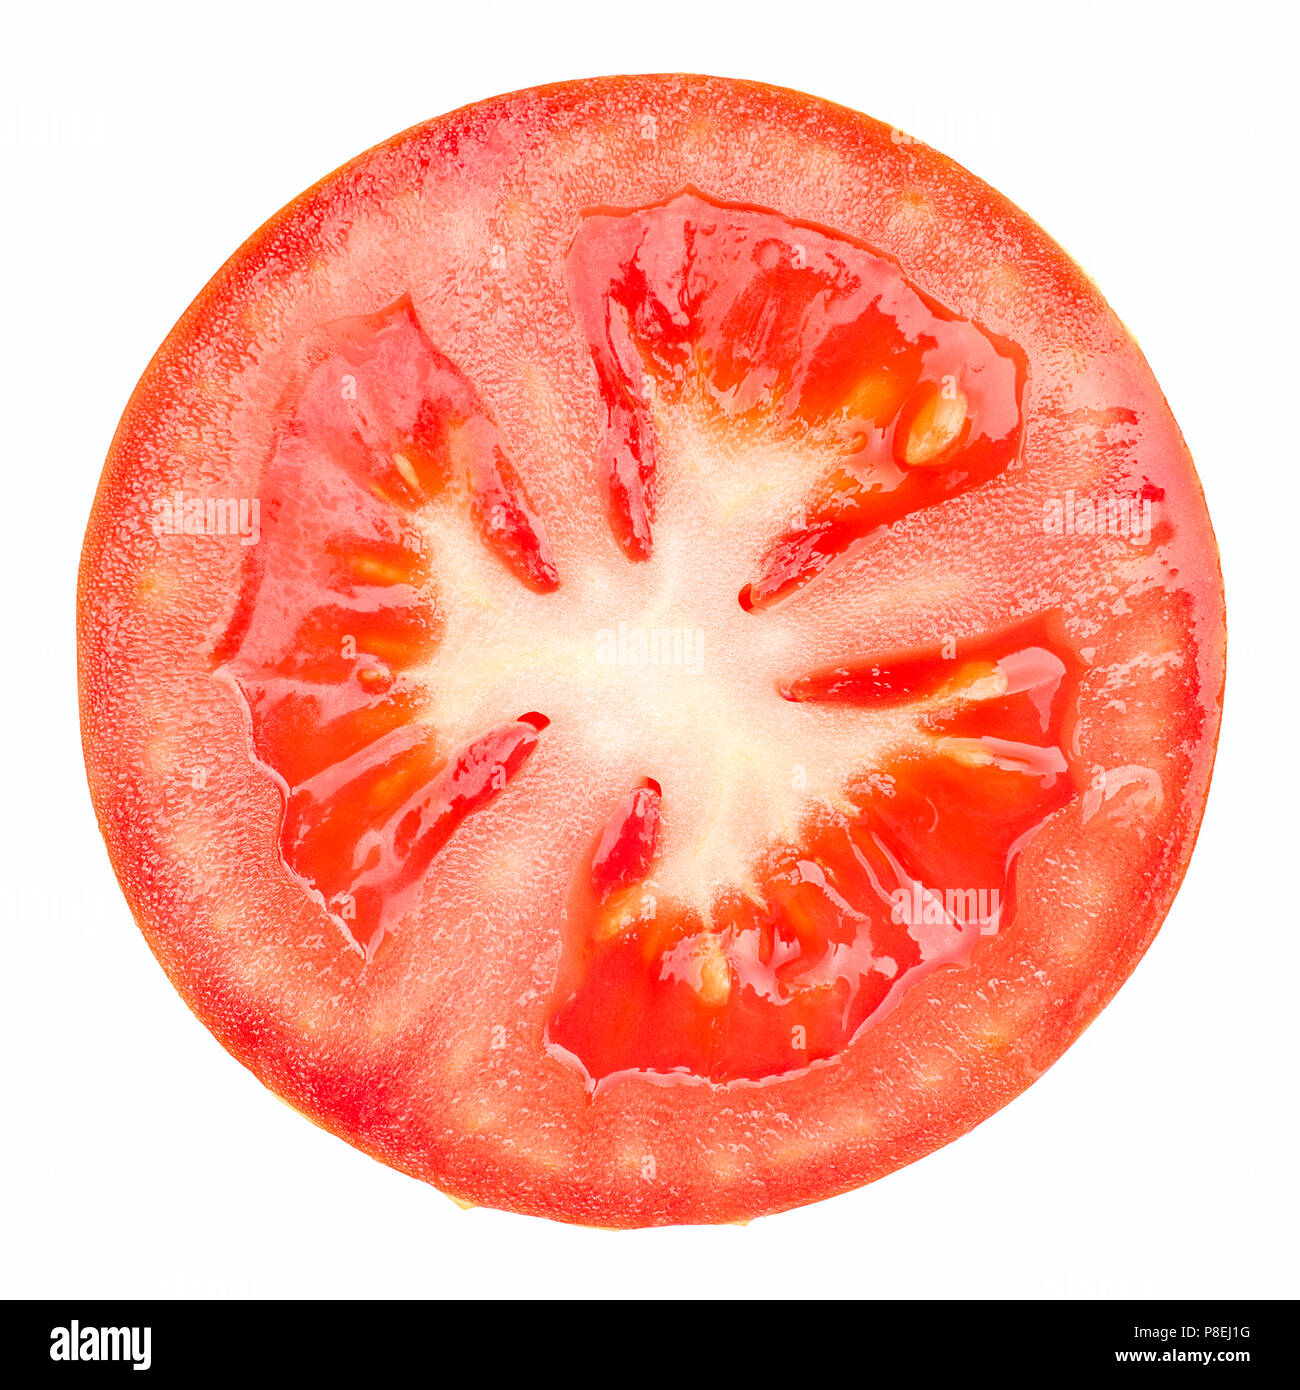 Red tomato slice, clipping path, isolated on white background Stock Photo